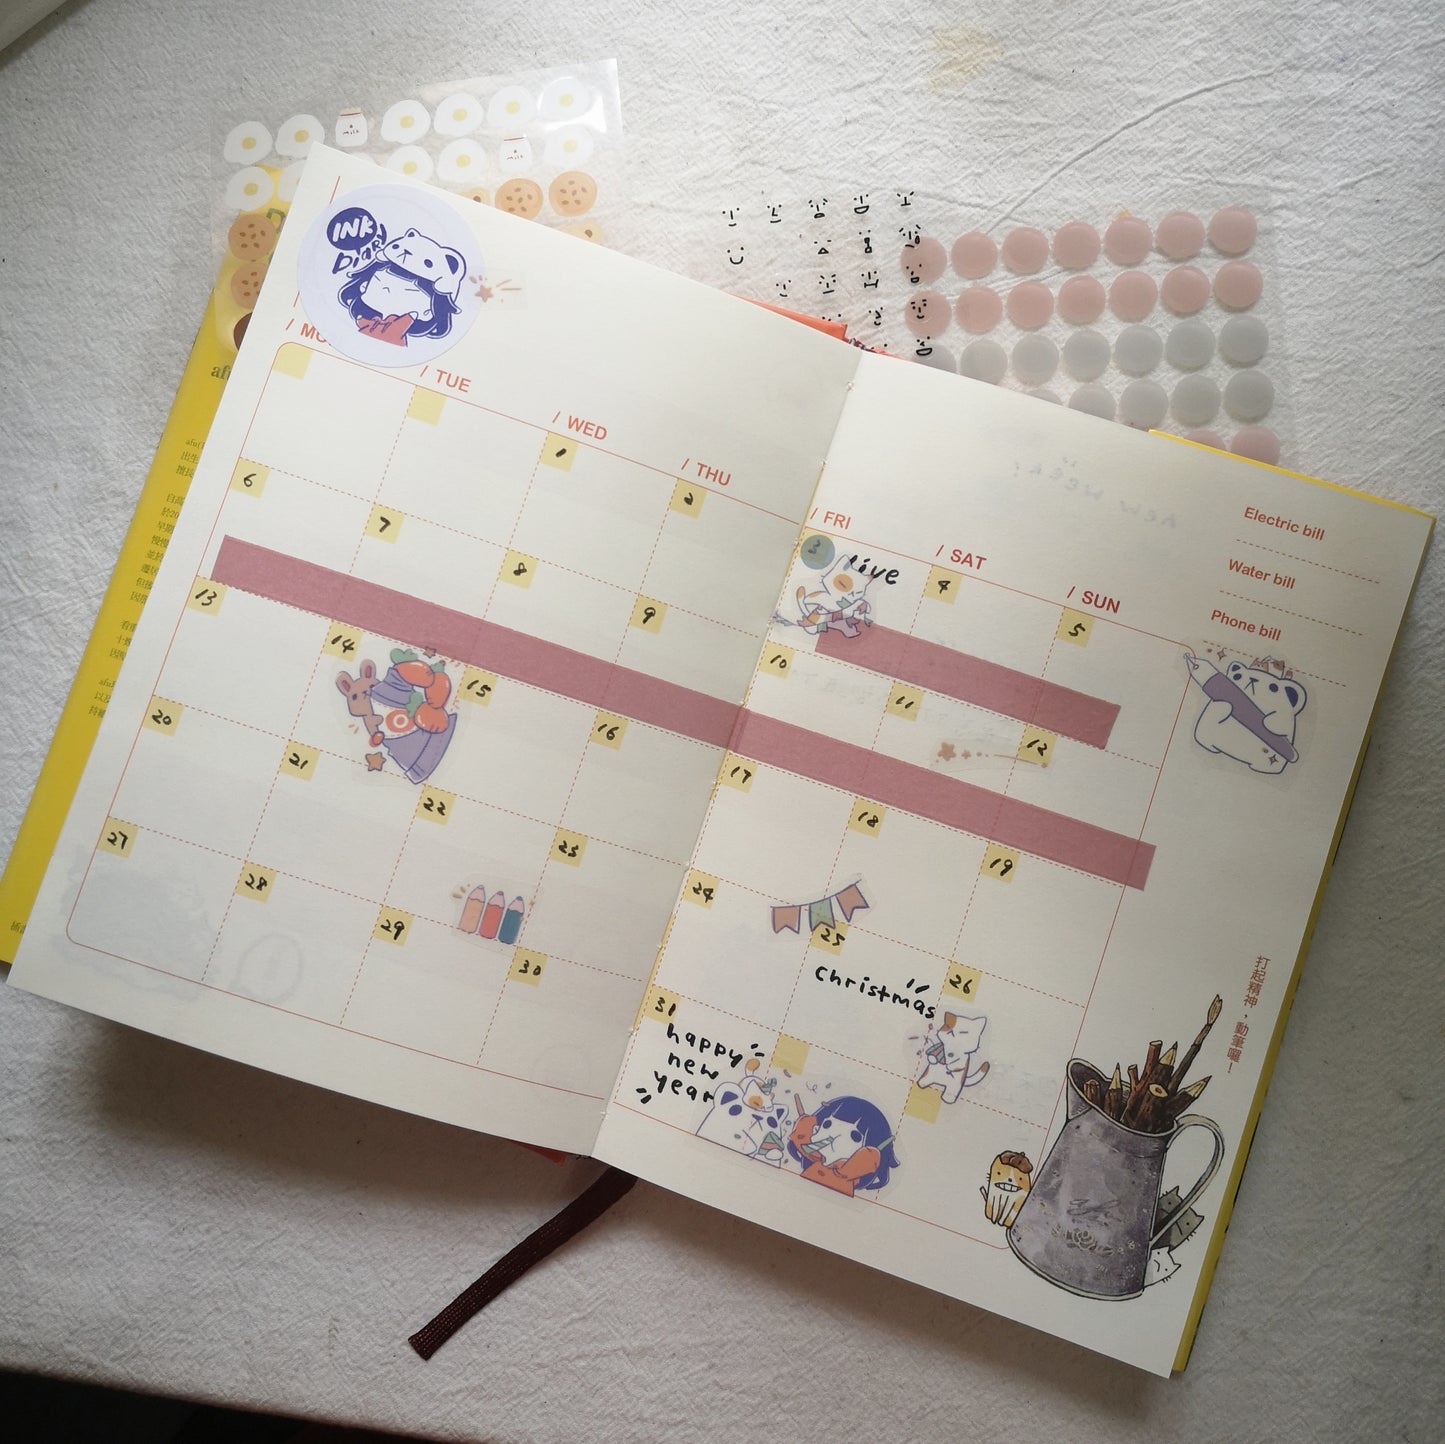 [INK.DIARY] Stationery life, clear pet tape